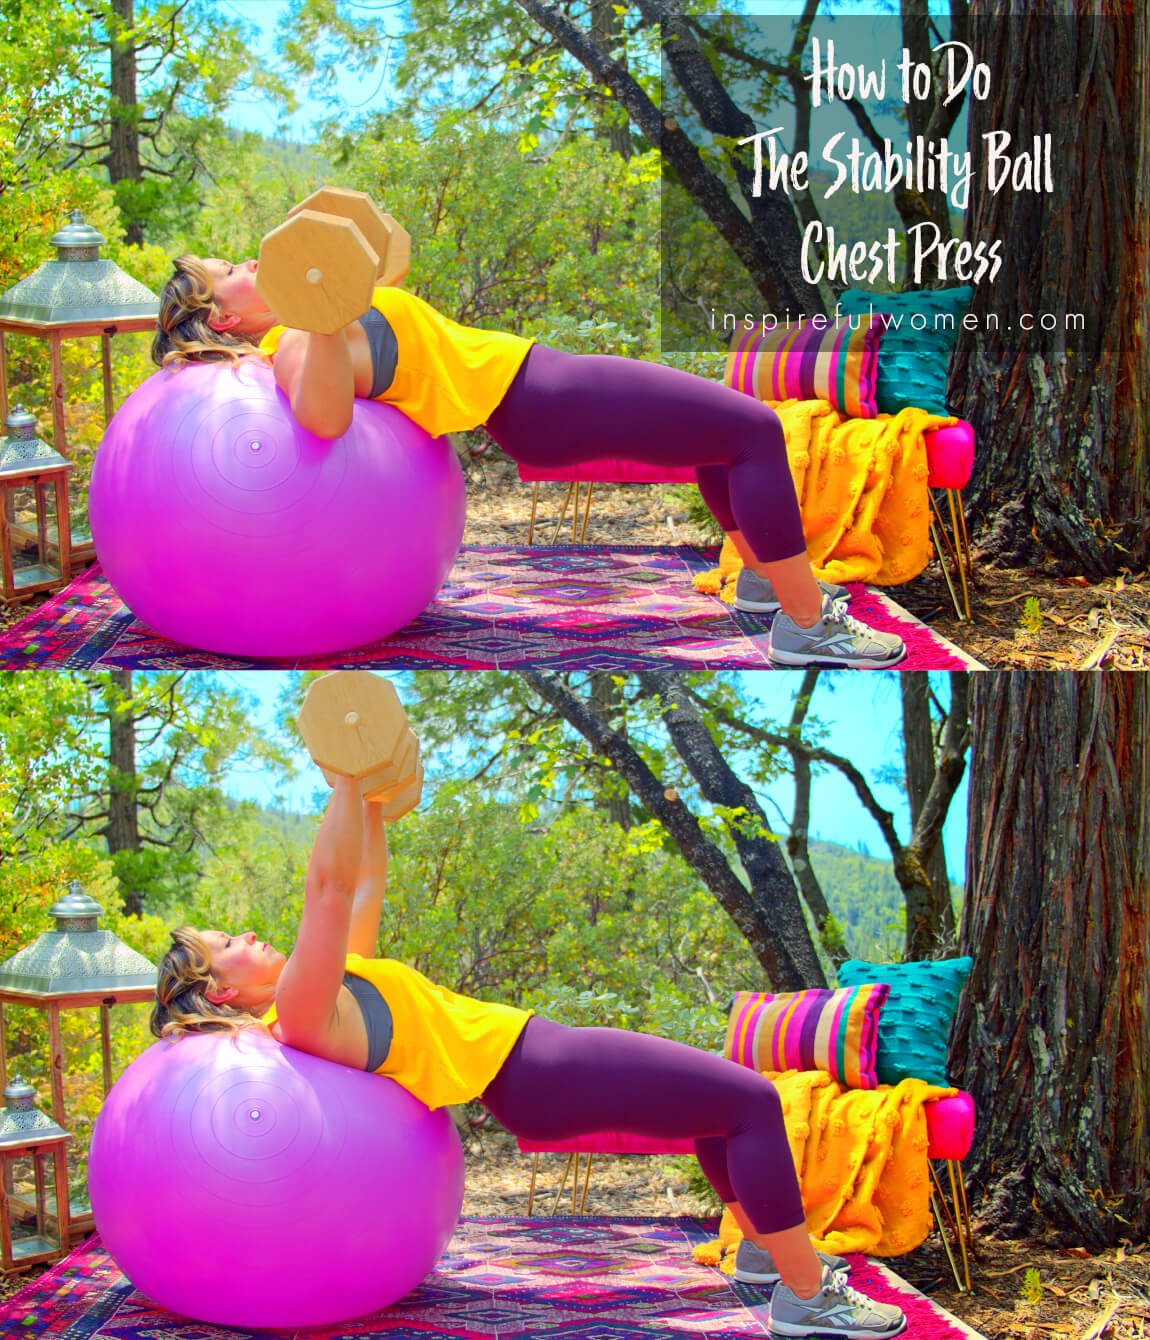 how-to-dumbbell-stability-ball-chest-press-at-home-pectoralis-major-exercise-side-view